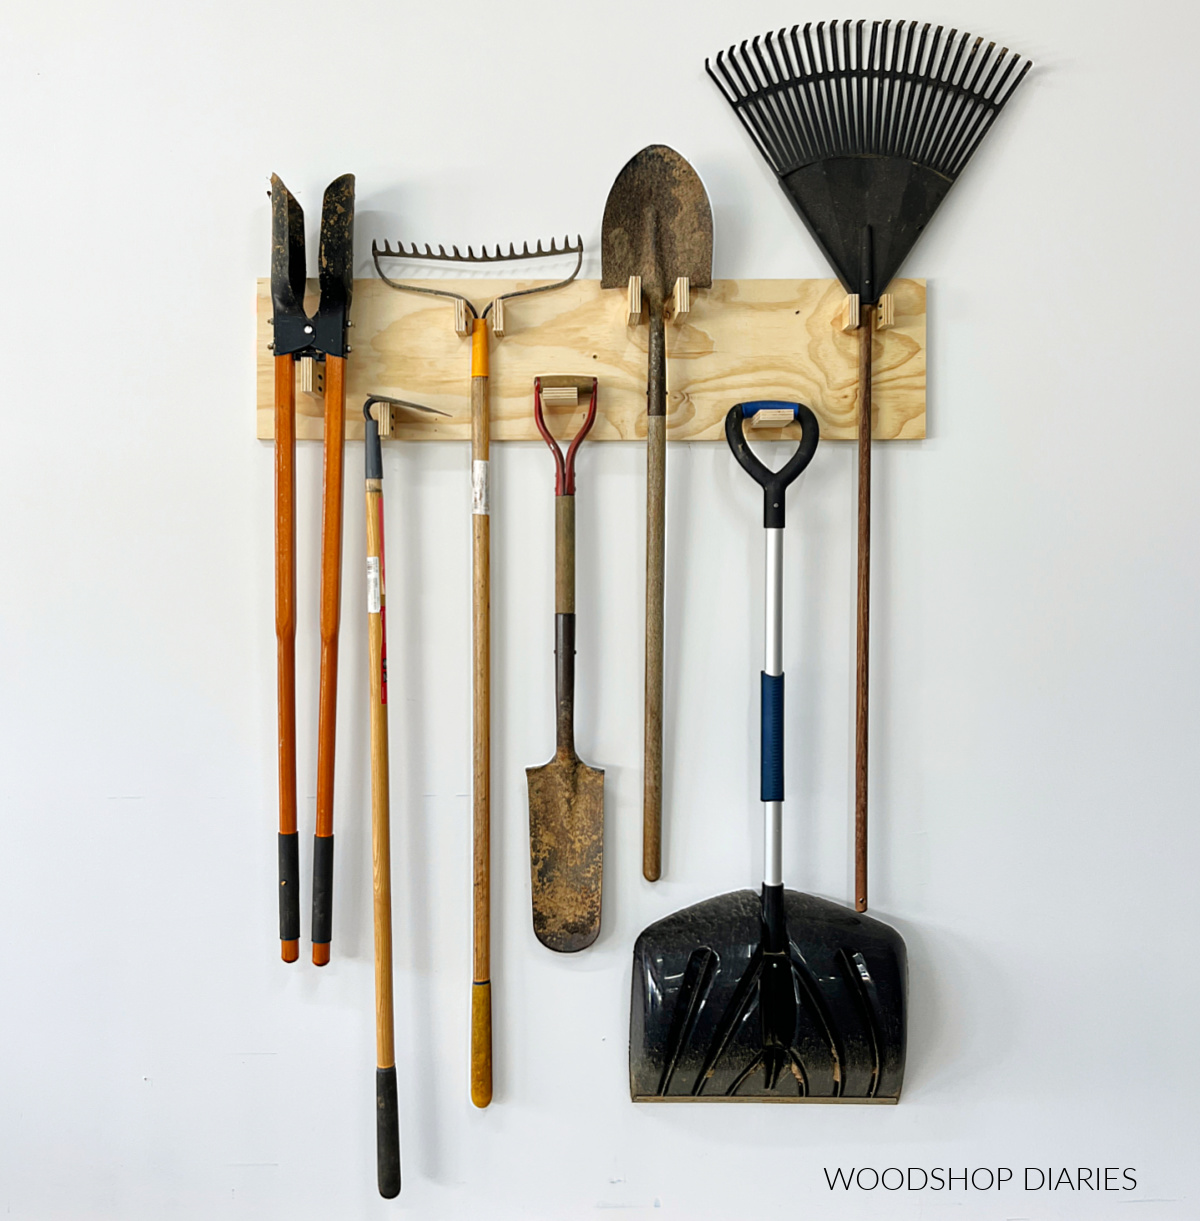 DIY Plywood yard tool organizer hanging on wall with shovels and rakes hanging on it